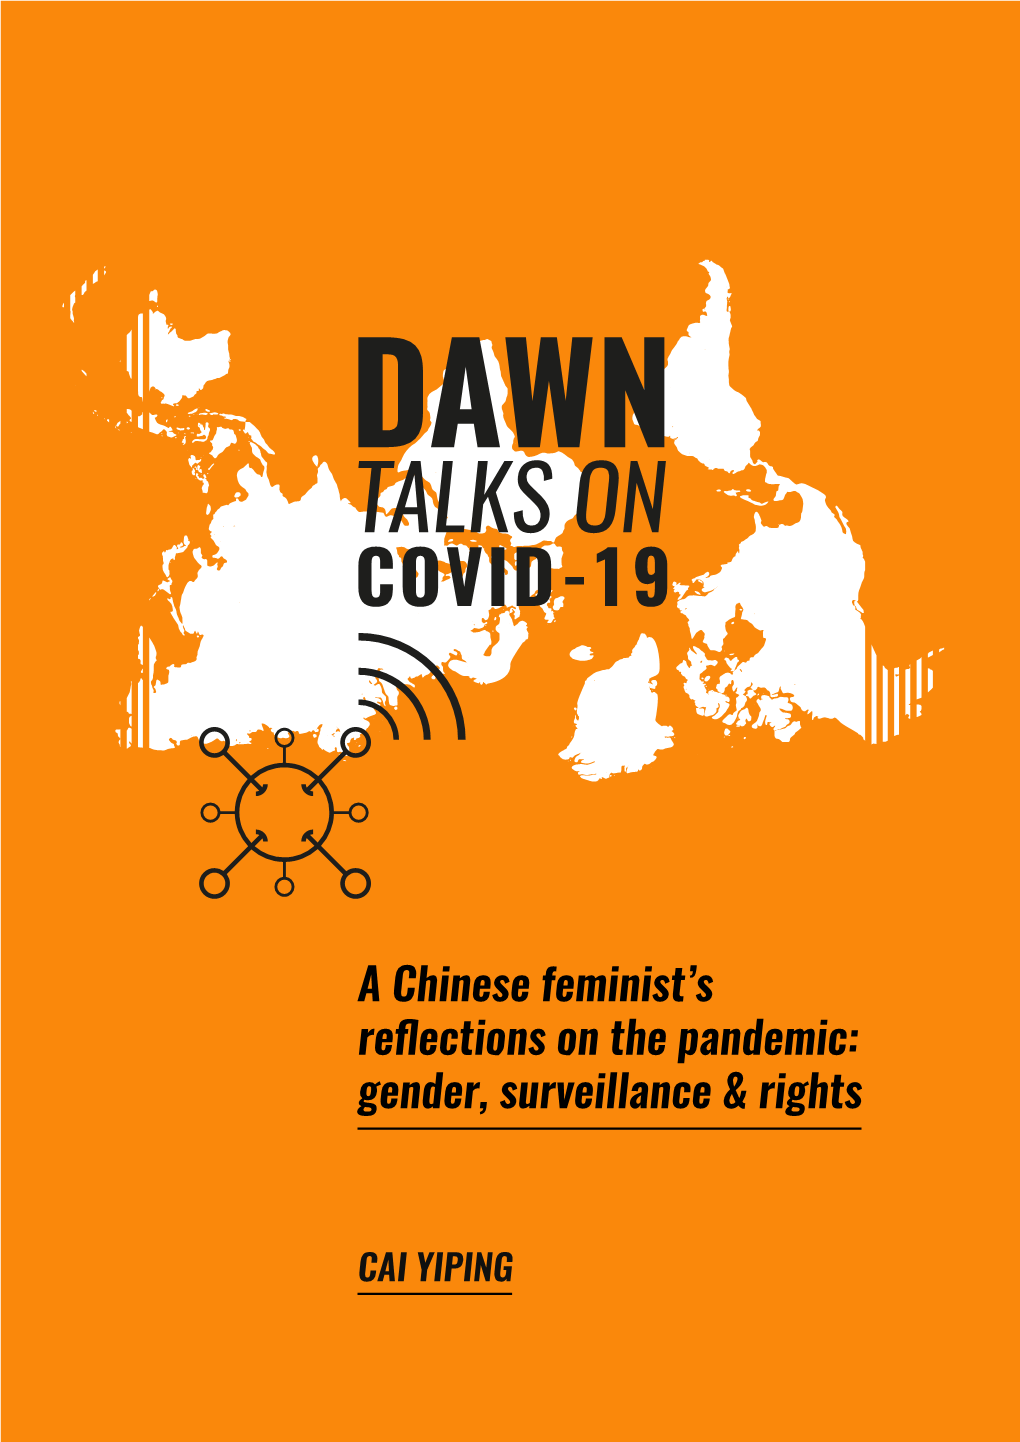 A Chinese Feminist's Reflections on the Pandemic: Gender, Surveillance